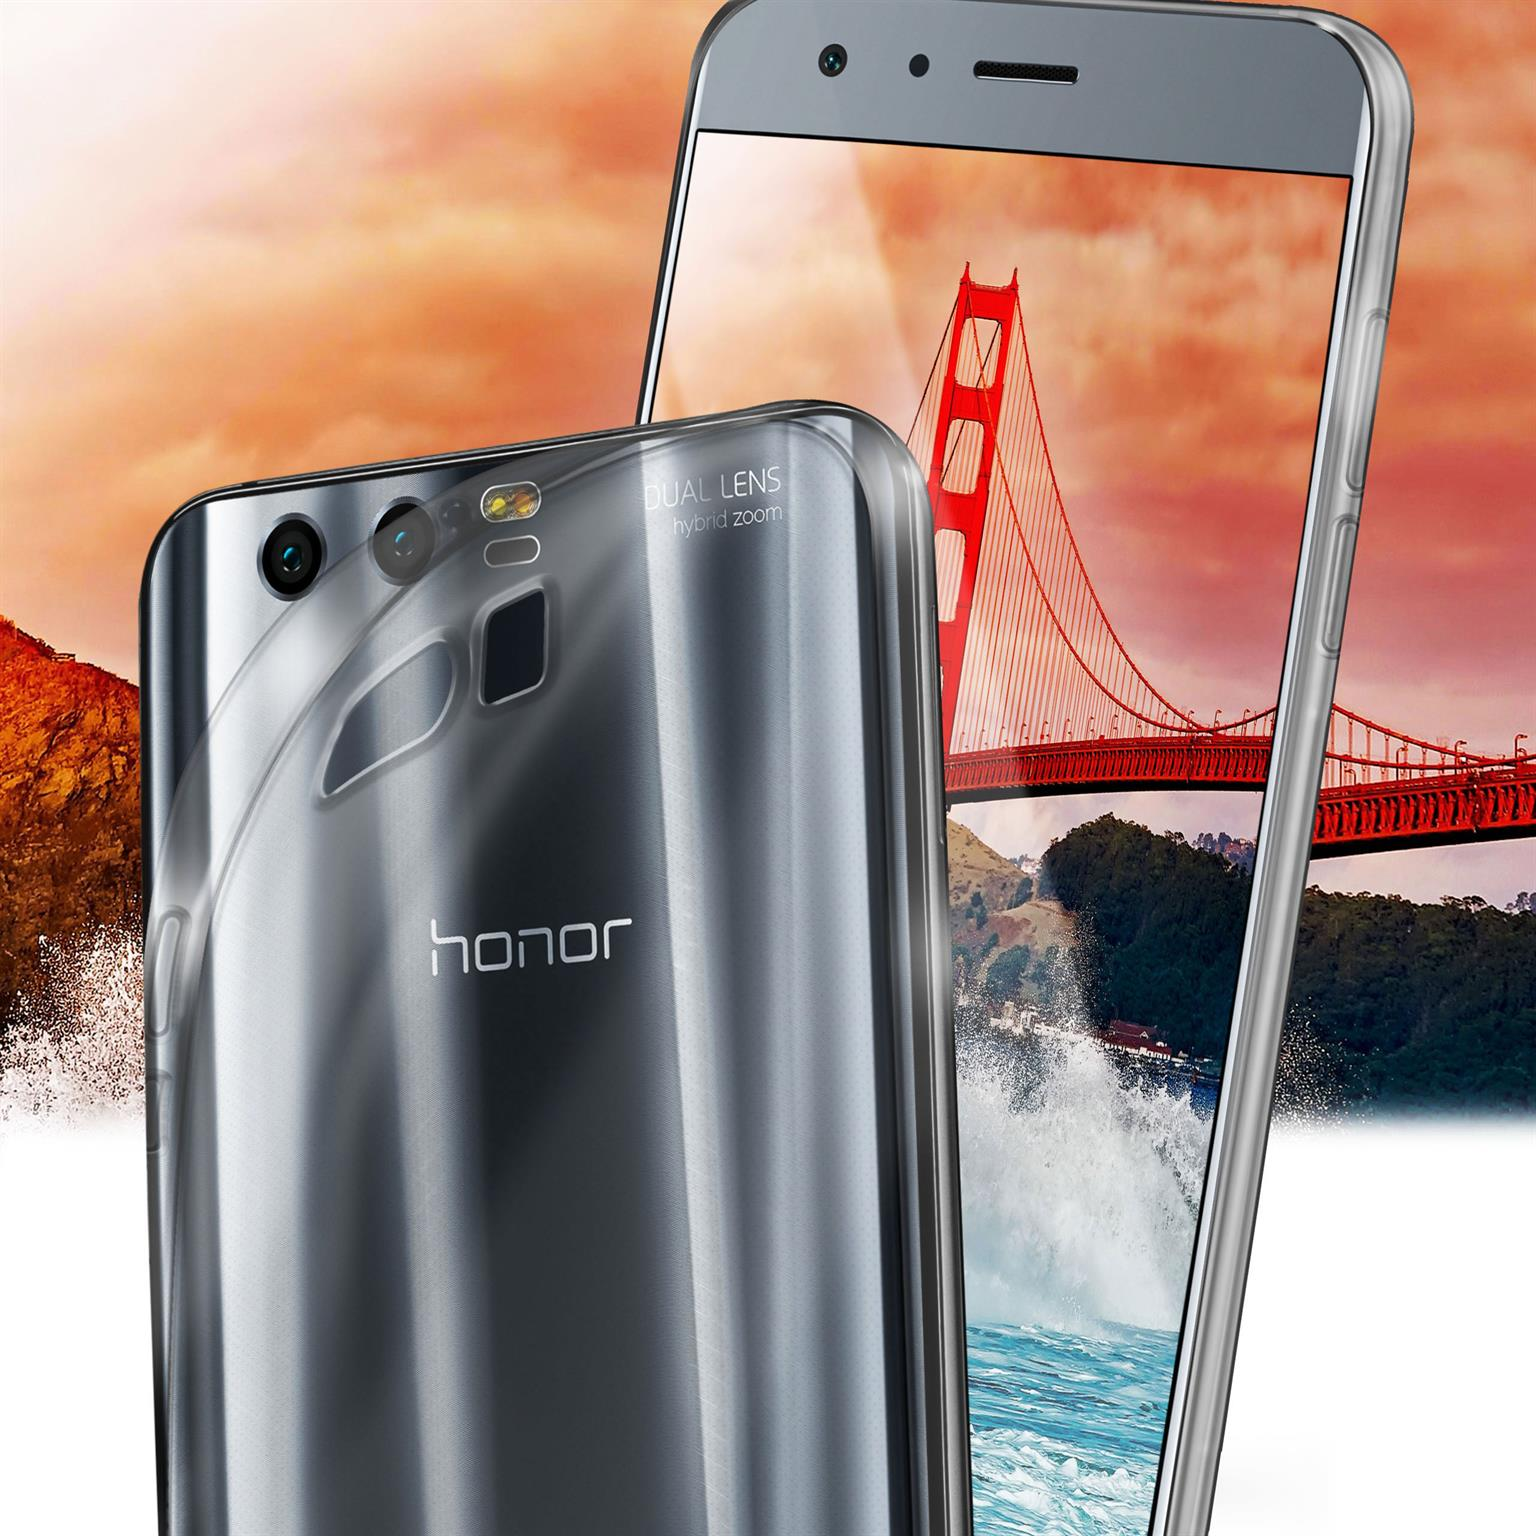 Backcover, Huawei, Crystal-Clear Honor Case, MOEX Aero 9,